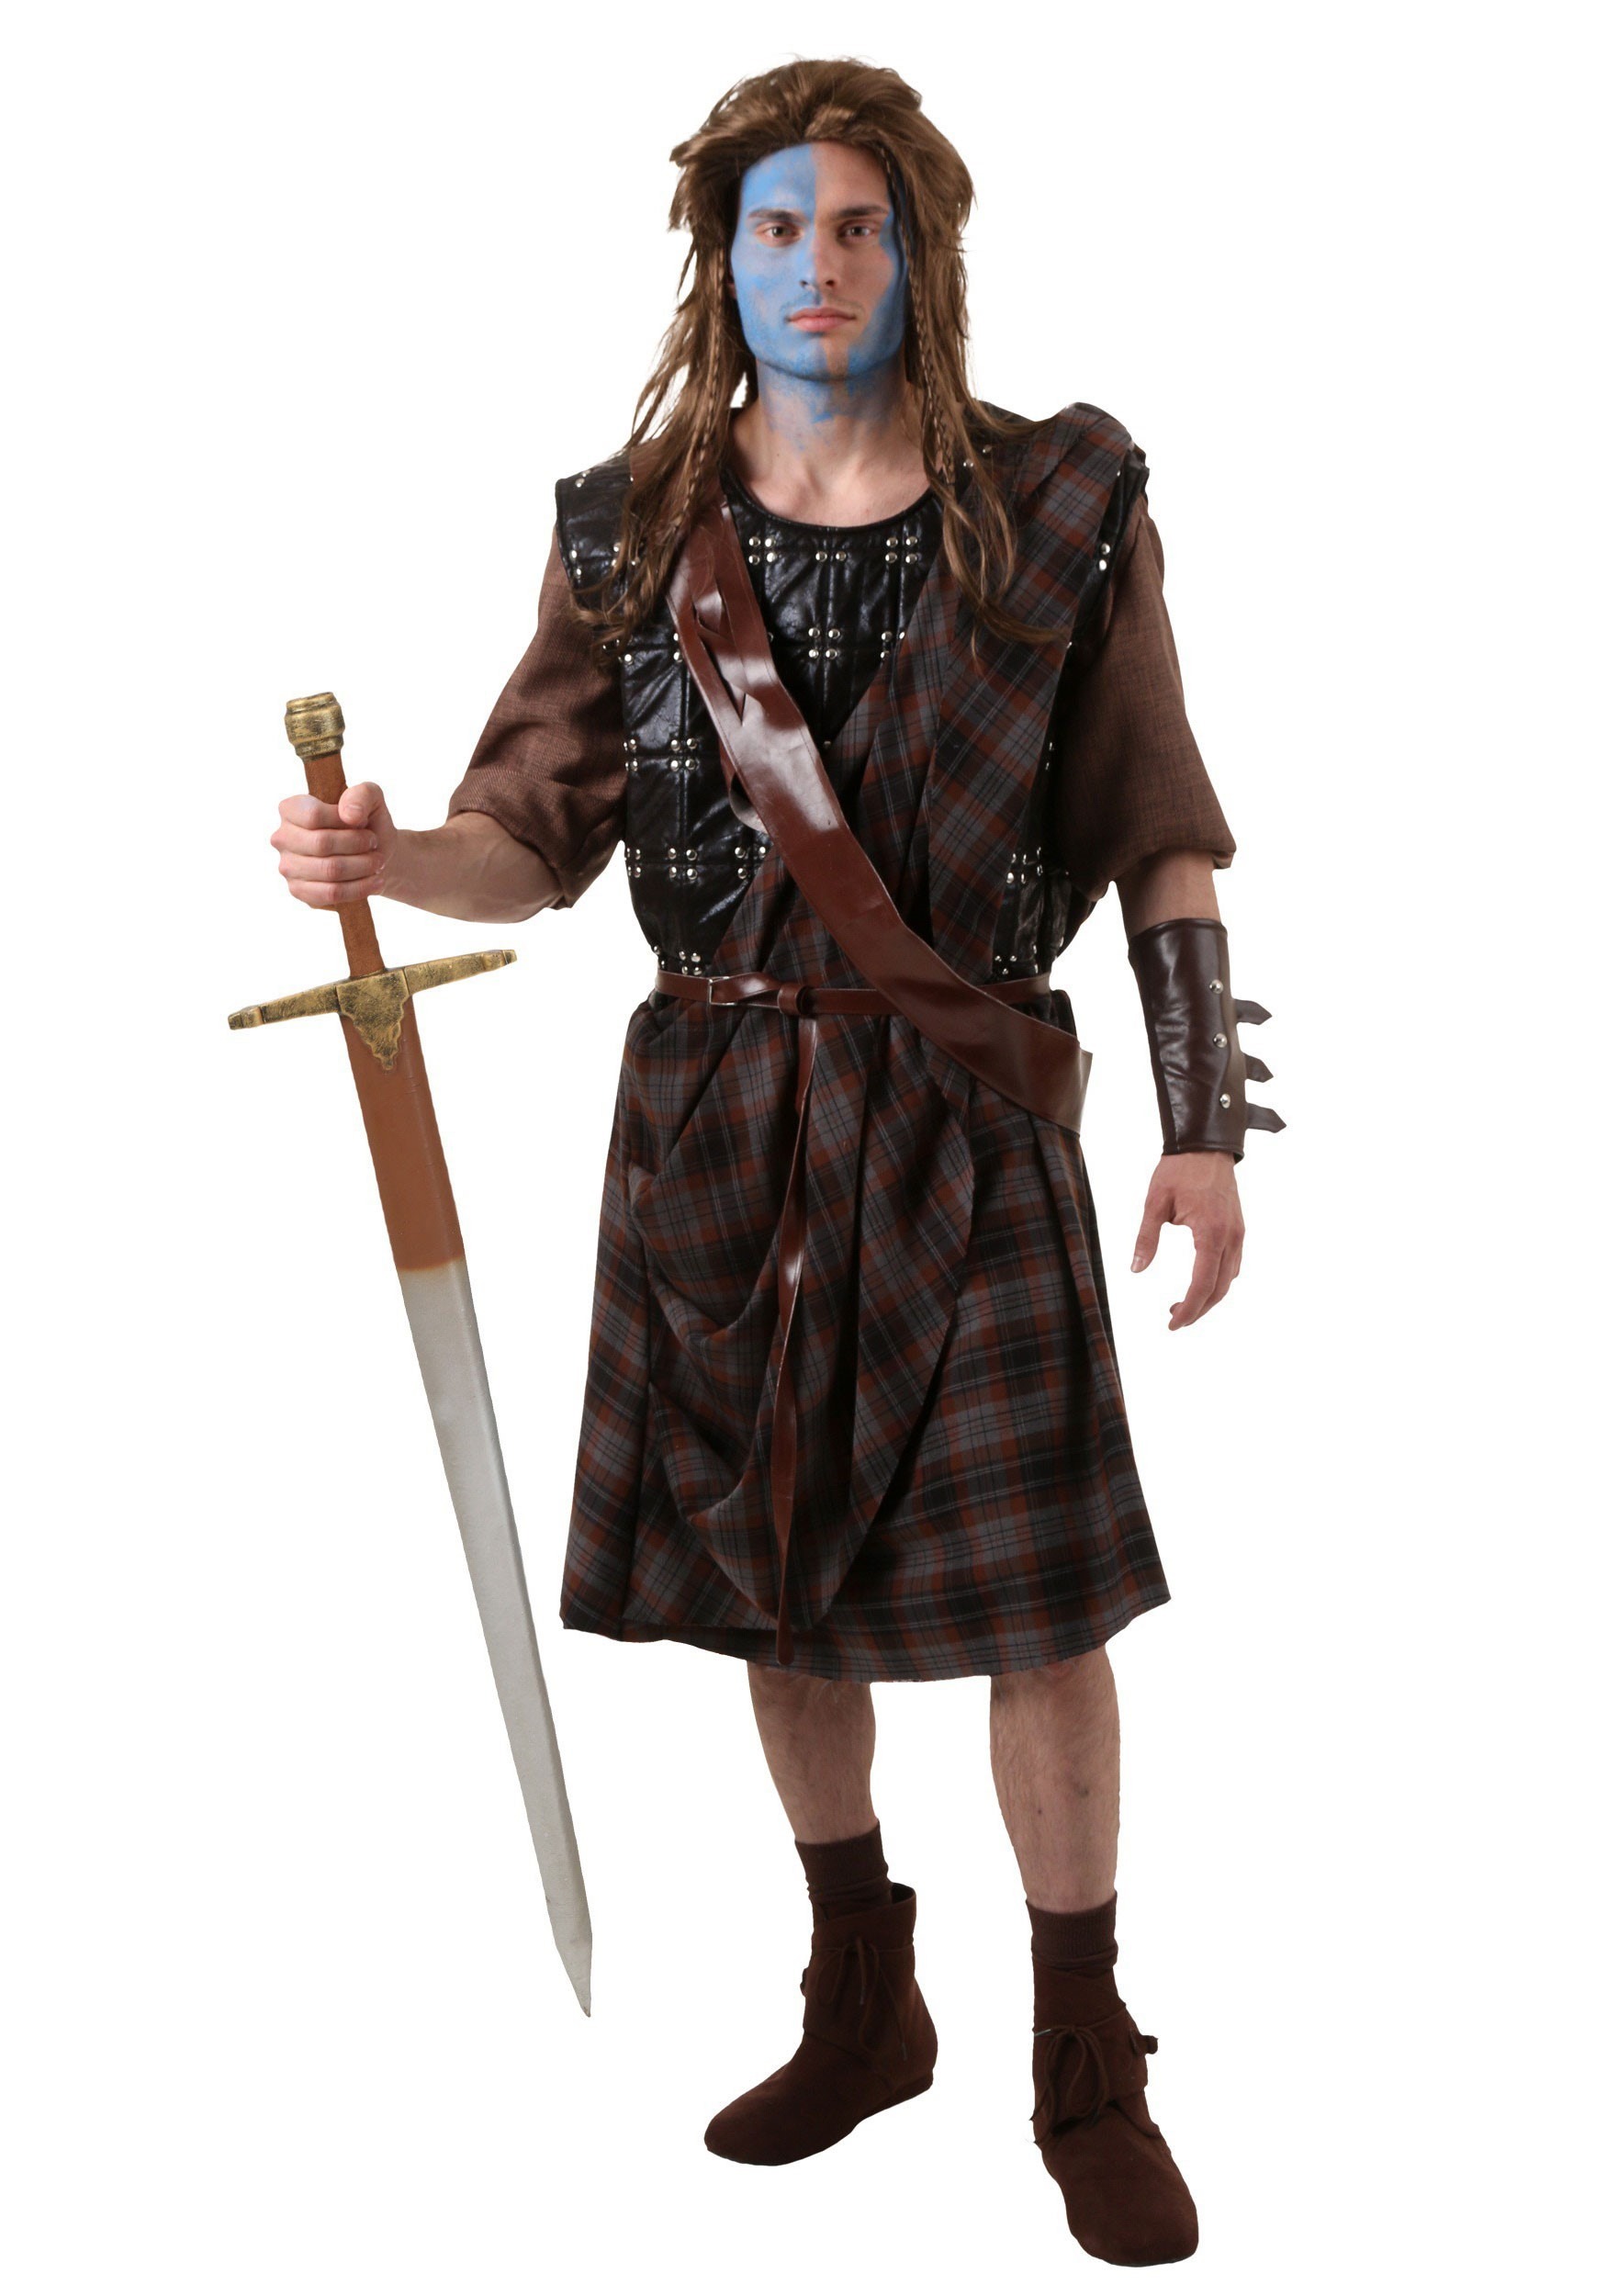 Photos - Fancy Dress Character FUN Costumes Adult Braveheart William Wallace Costume Black/Yellow/ 